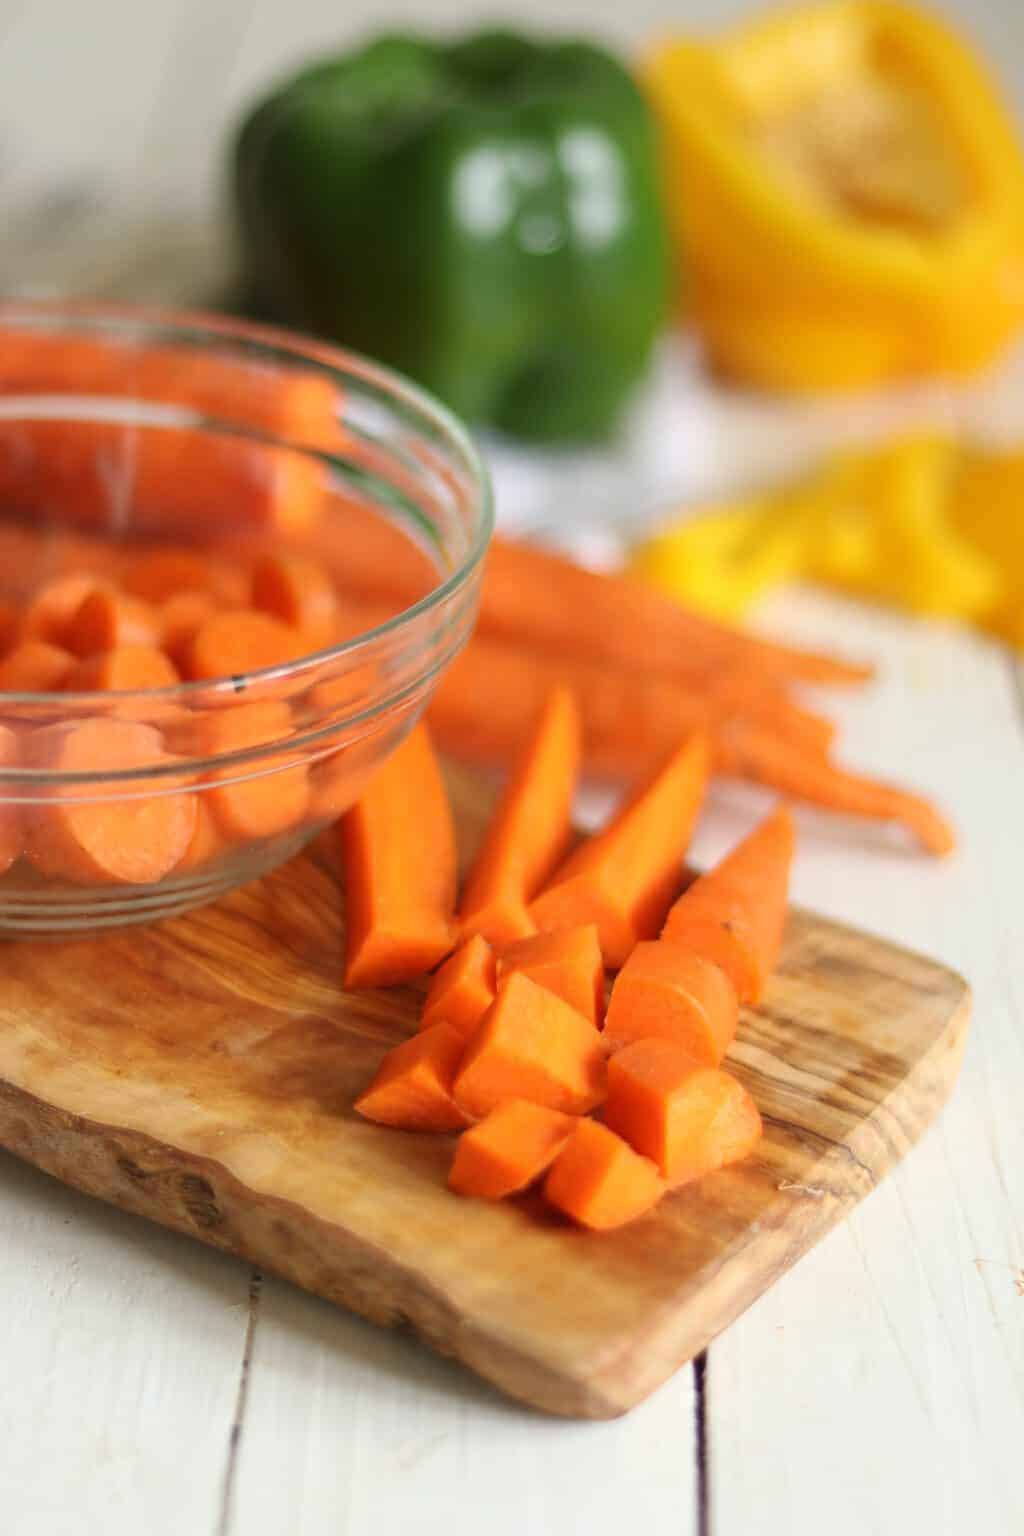 Chopped carrots on wooden cutting board.